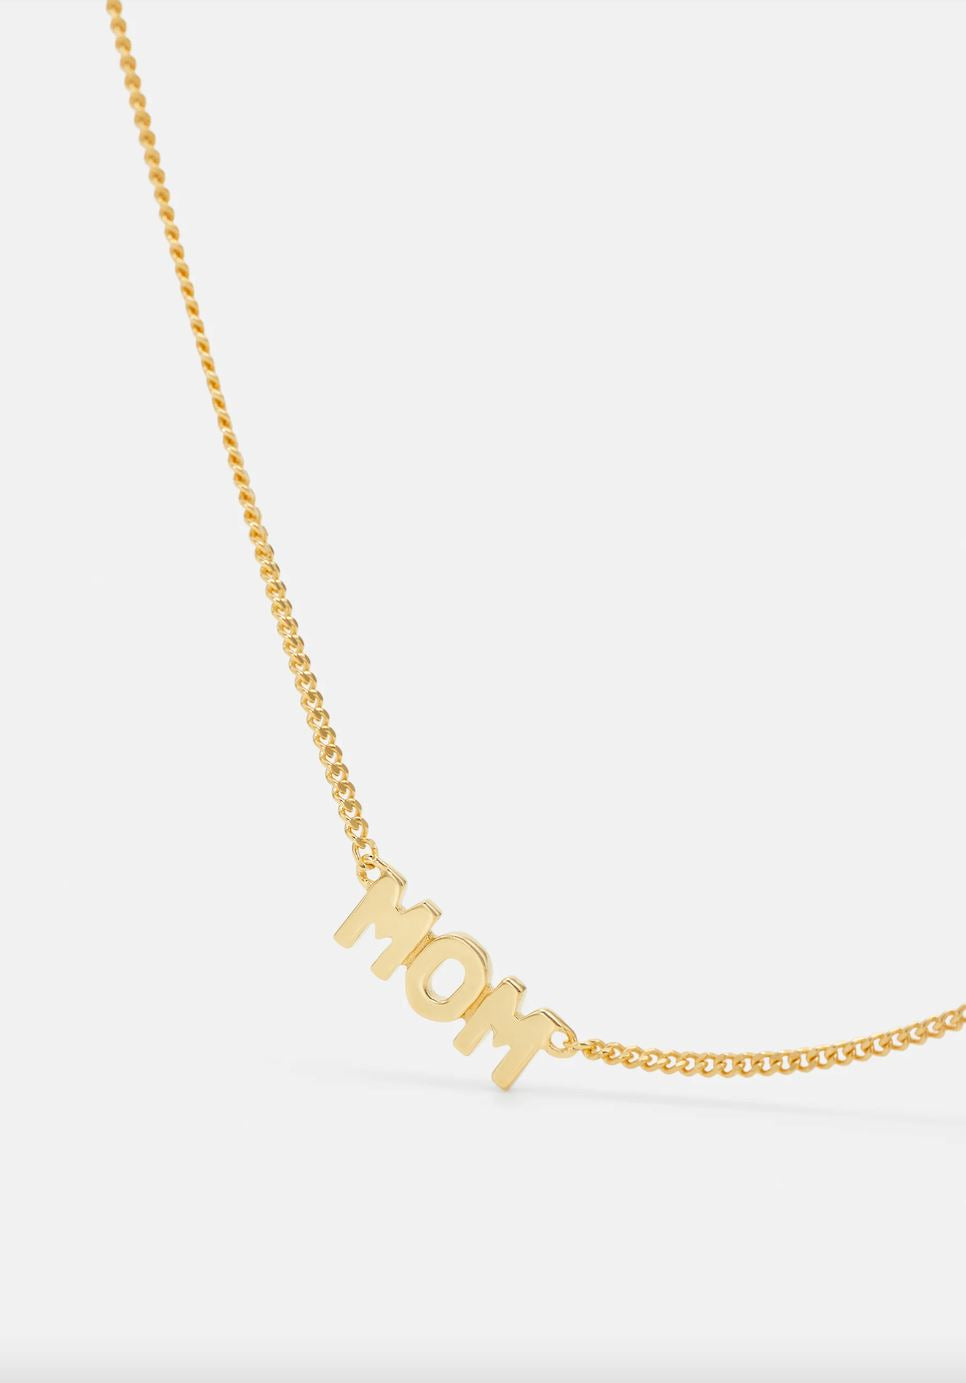 MOM NECKLACE 43 CM IN GOLD NECKLACE MARIA BLACK 